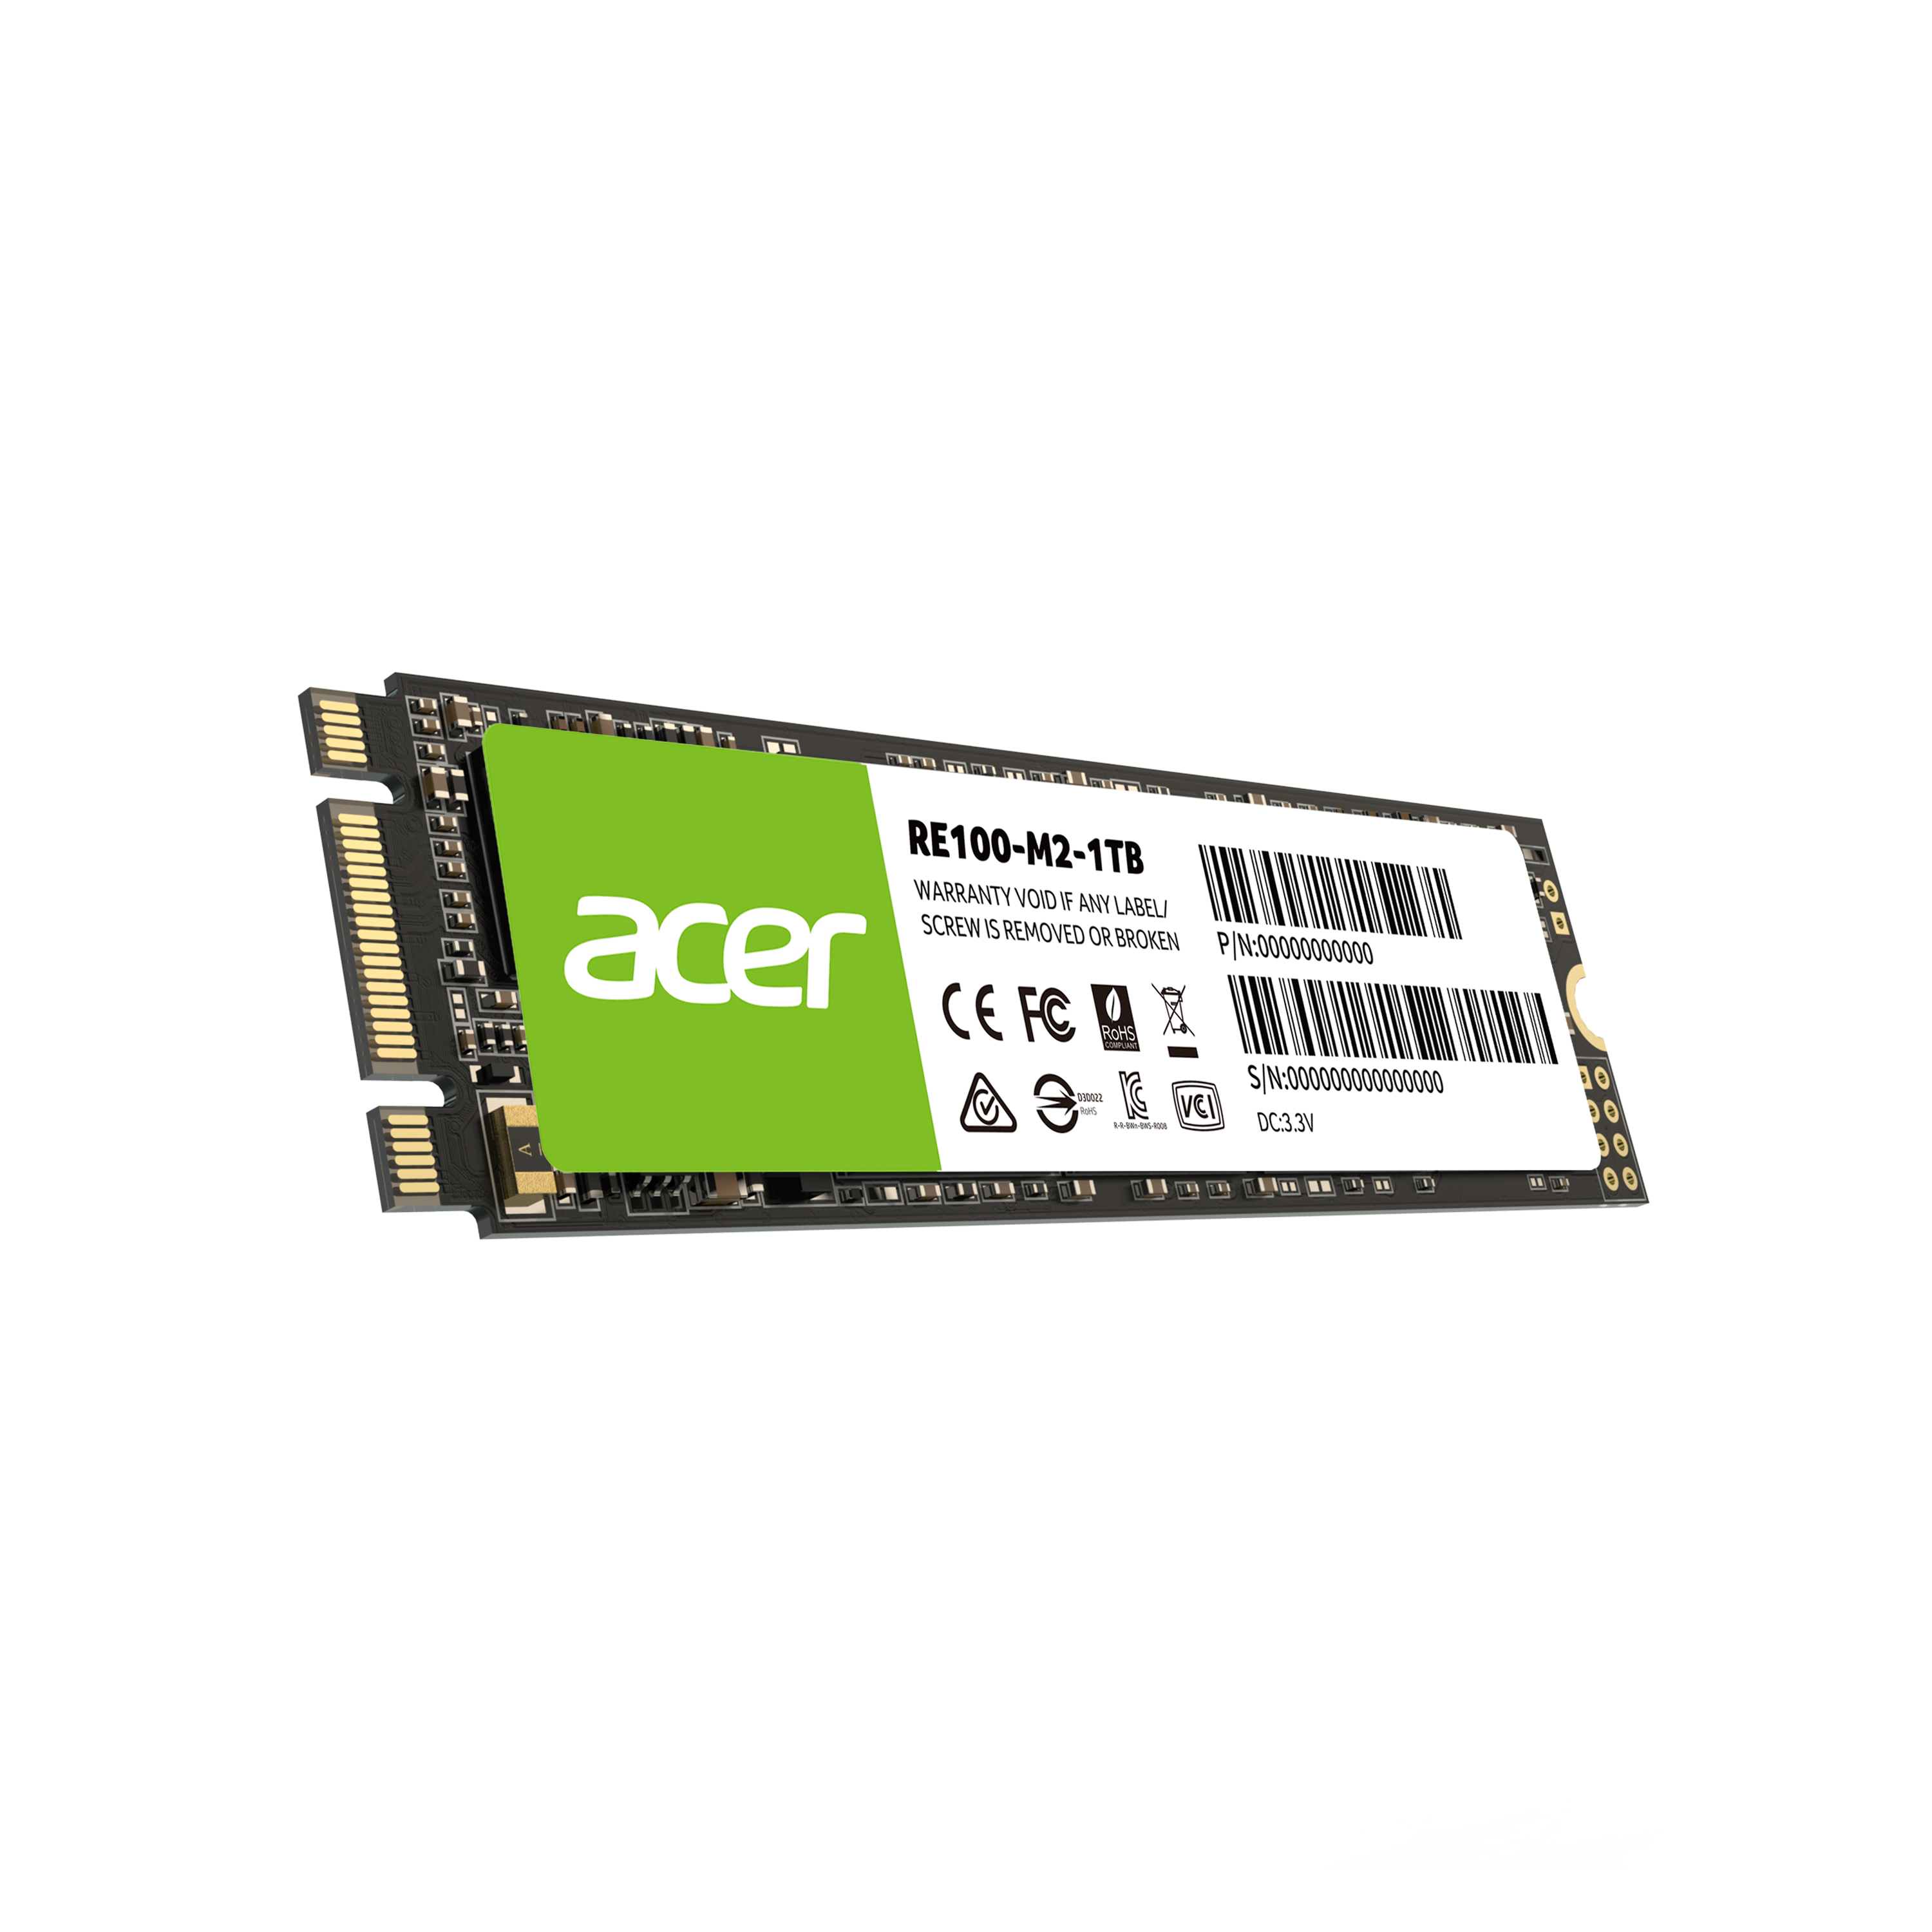 Acer RE100 M.2 SATA SSD for faster reading and writing